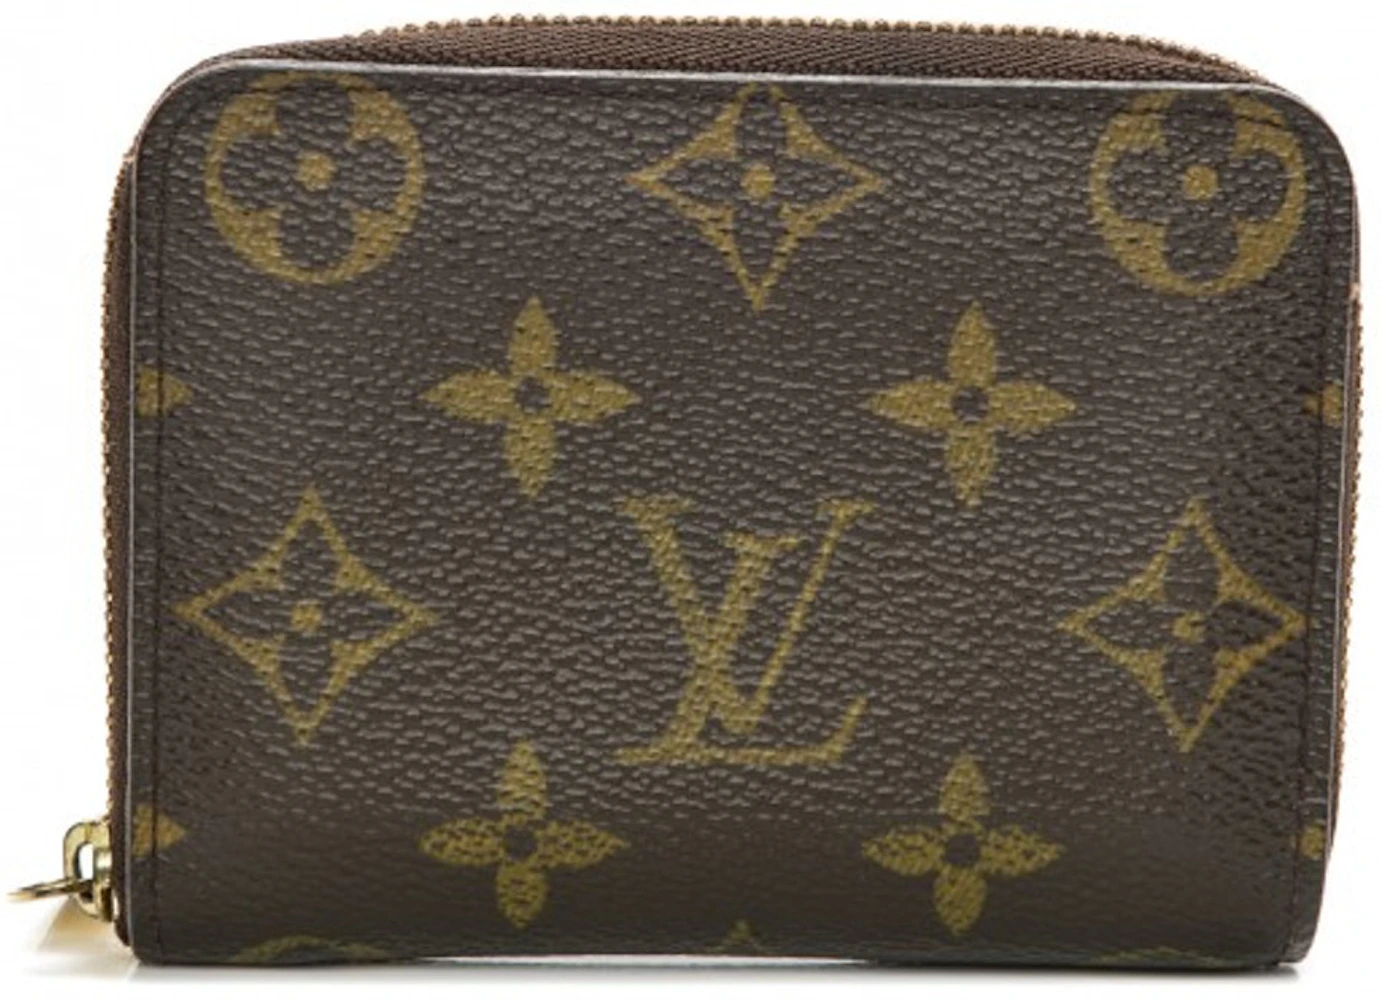 Louis Vuitton - Zippy and Clemence Wallets Compared - Gin & Pretzels